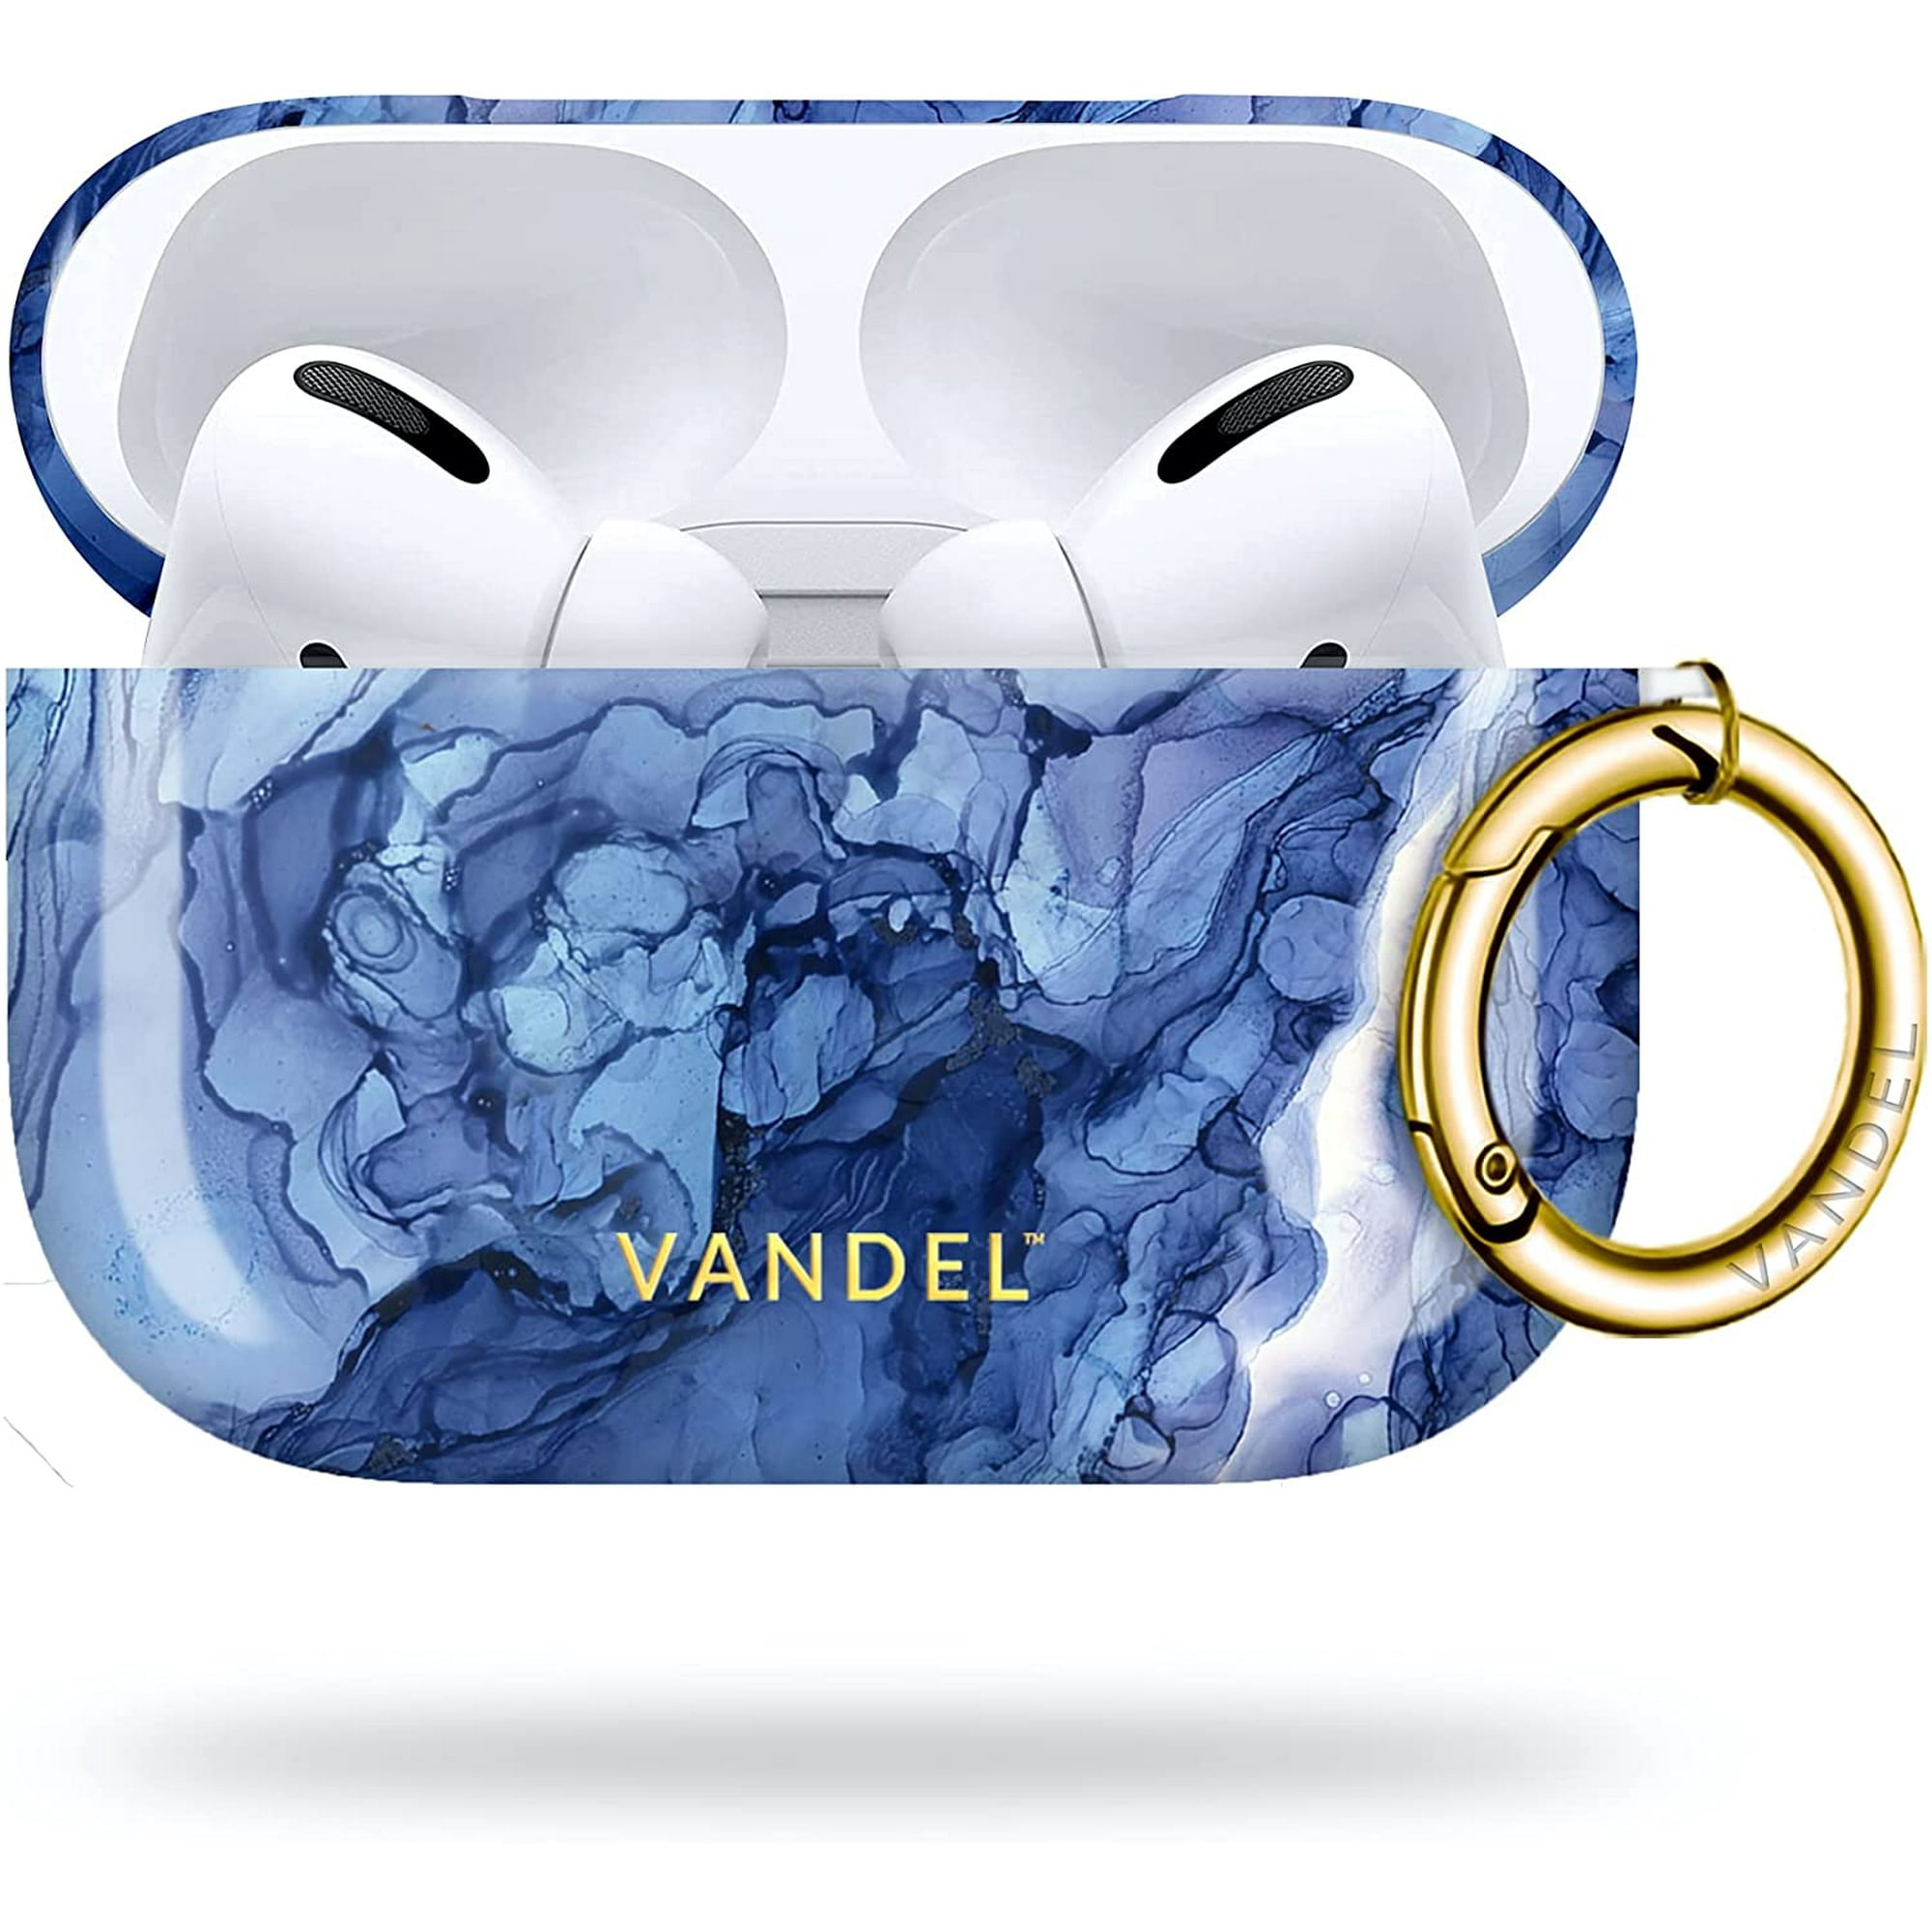 Vandel Airpods Pro Case for Women, Hard IBAOLEA AirPod Pro Case Cover with  Keychain for Girls, Cool Luxury Aesthetic Designs, IBAOLEA Air Pods  Protective Charging Case (Cow) Azure | Walmart Canada